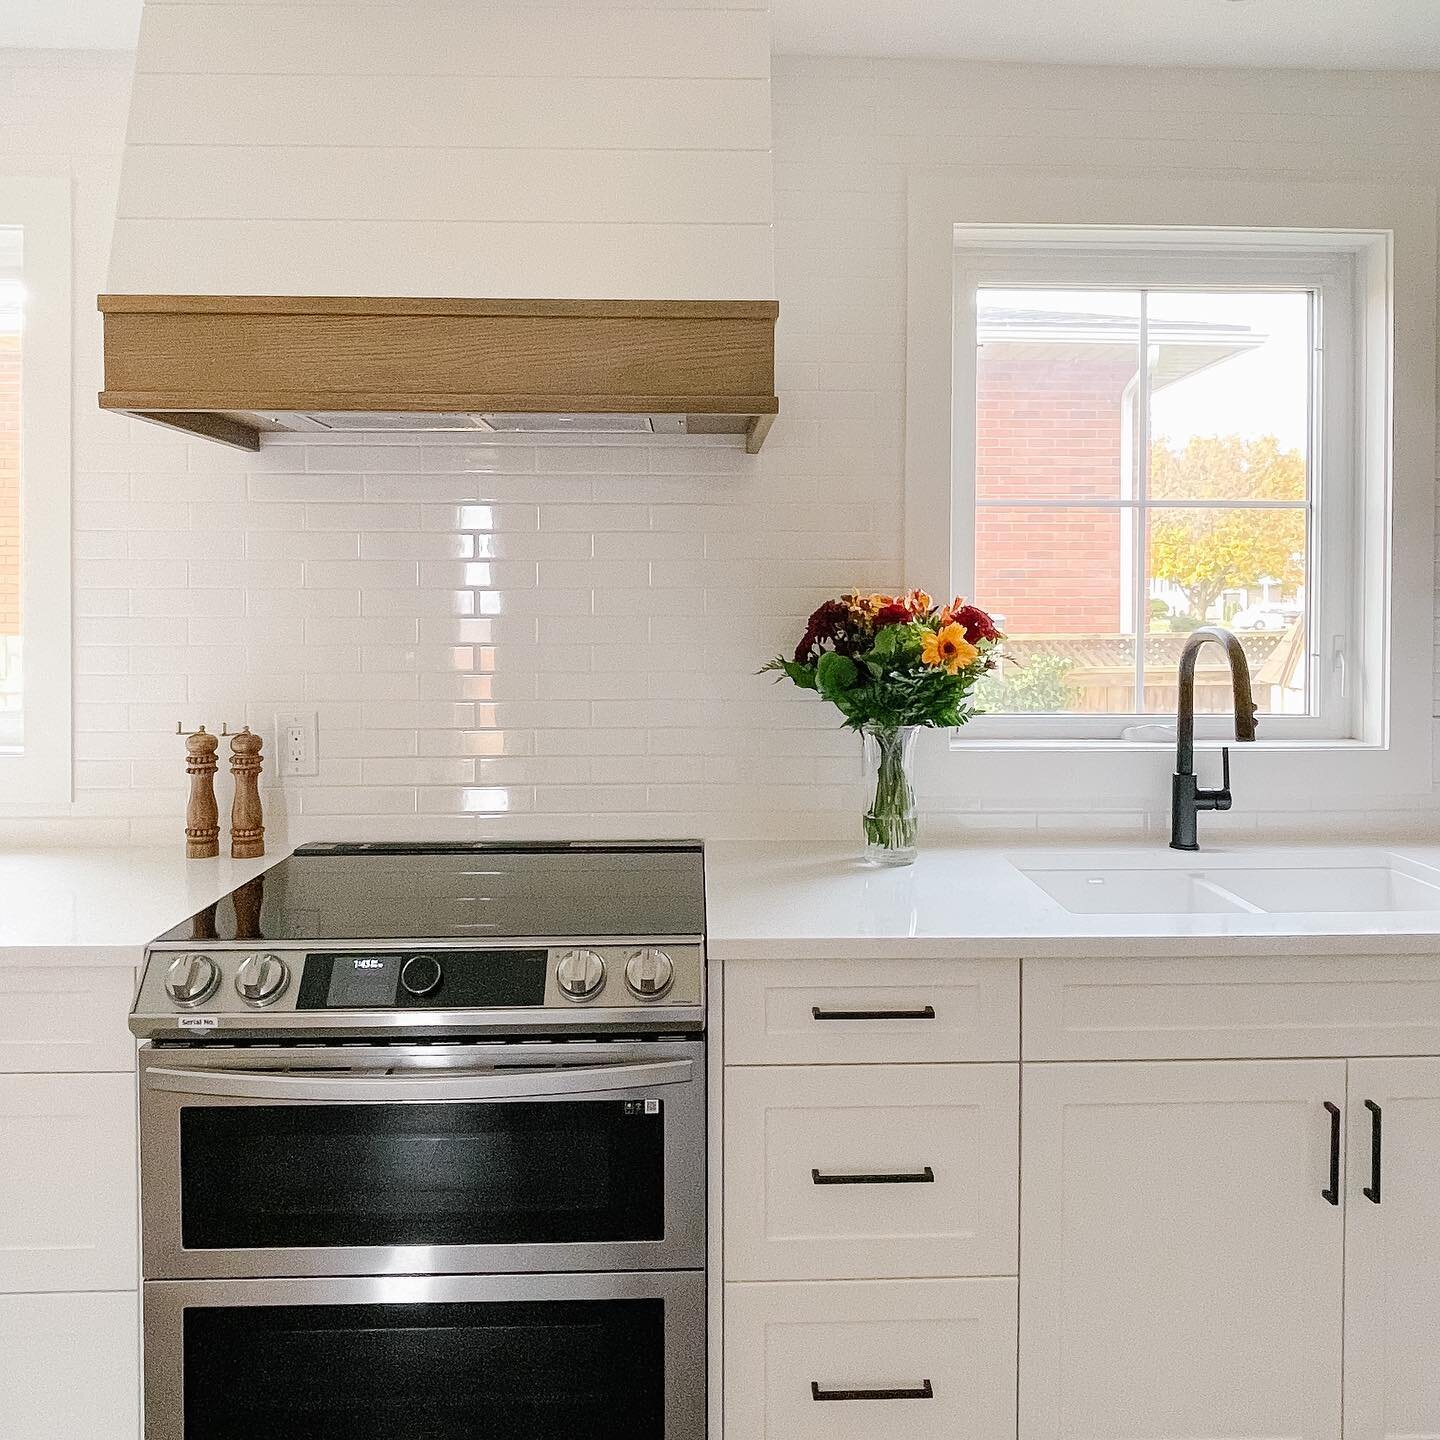 We love the shiplap detailing over the range hood. These types of elements can turn a basic kitchen into a unique &amp; stunning space✨

#customkitchencabinets #customkitchens #kwrenovations #guelphrenovation #niagararenovations